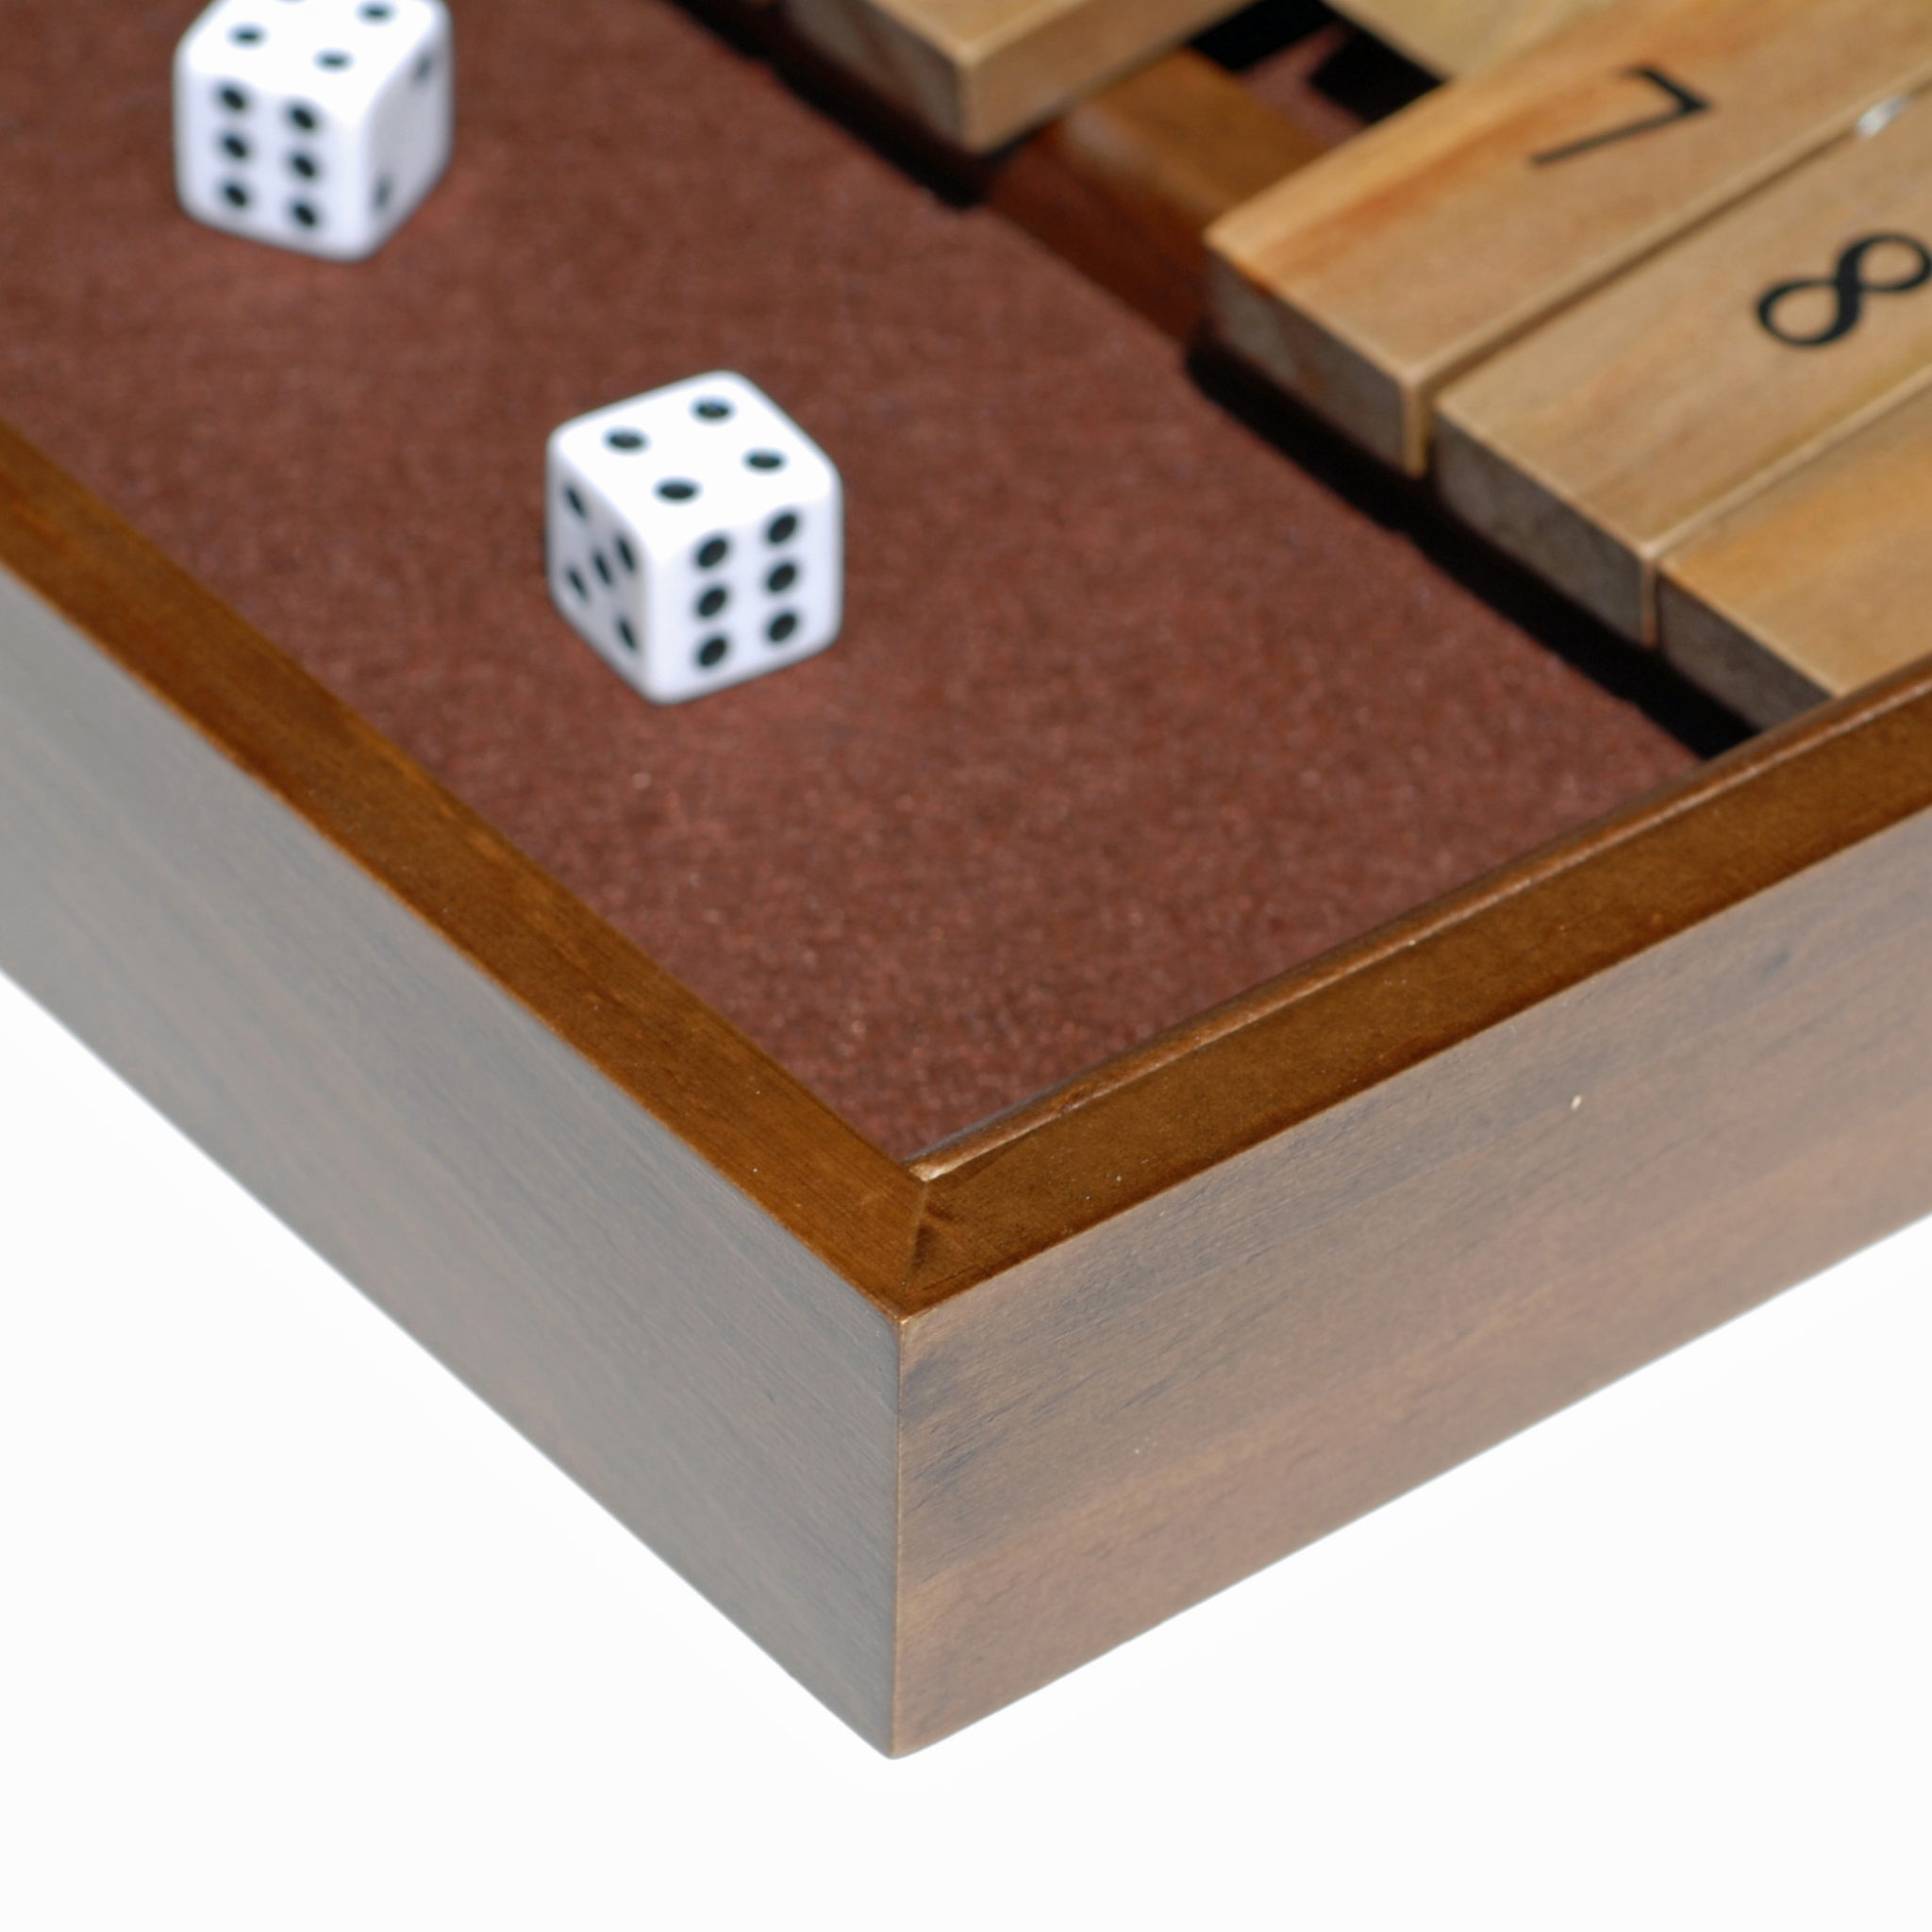 STERLING Shut The Box Game Family Dice Game Wood